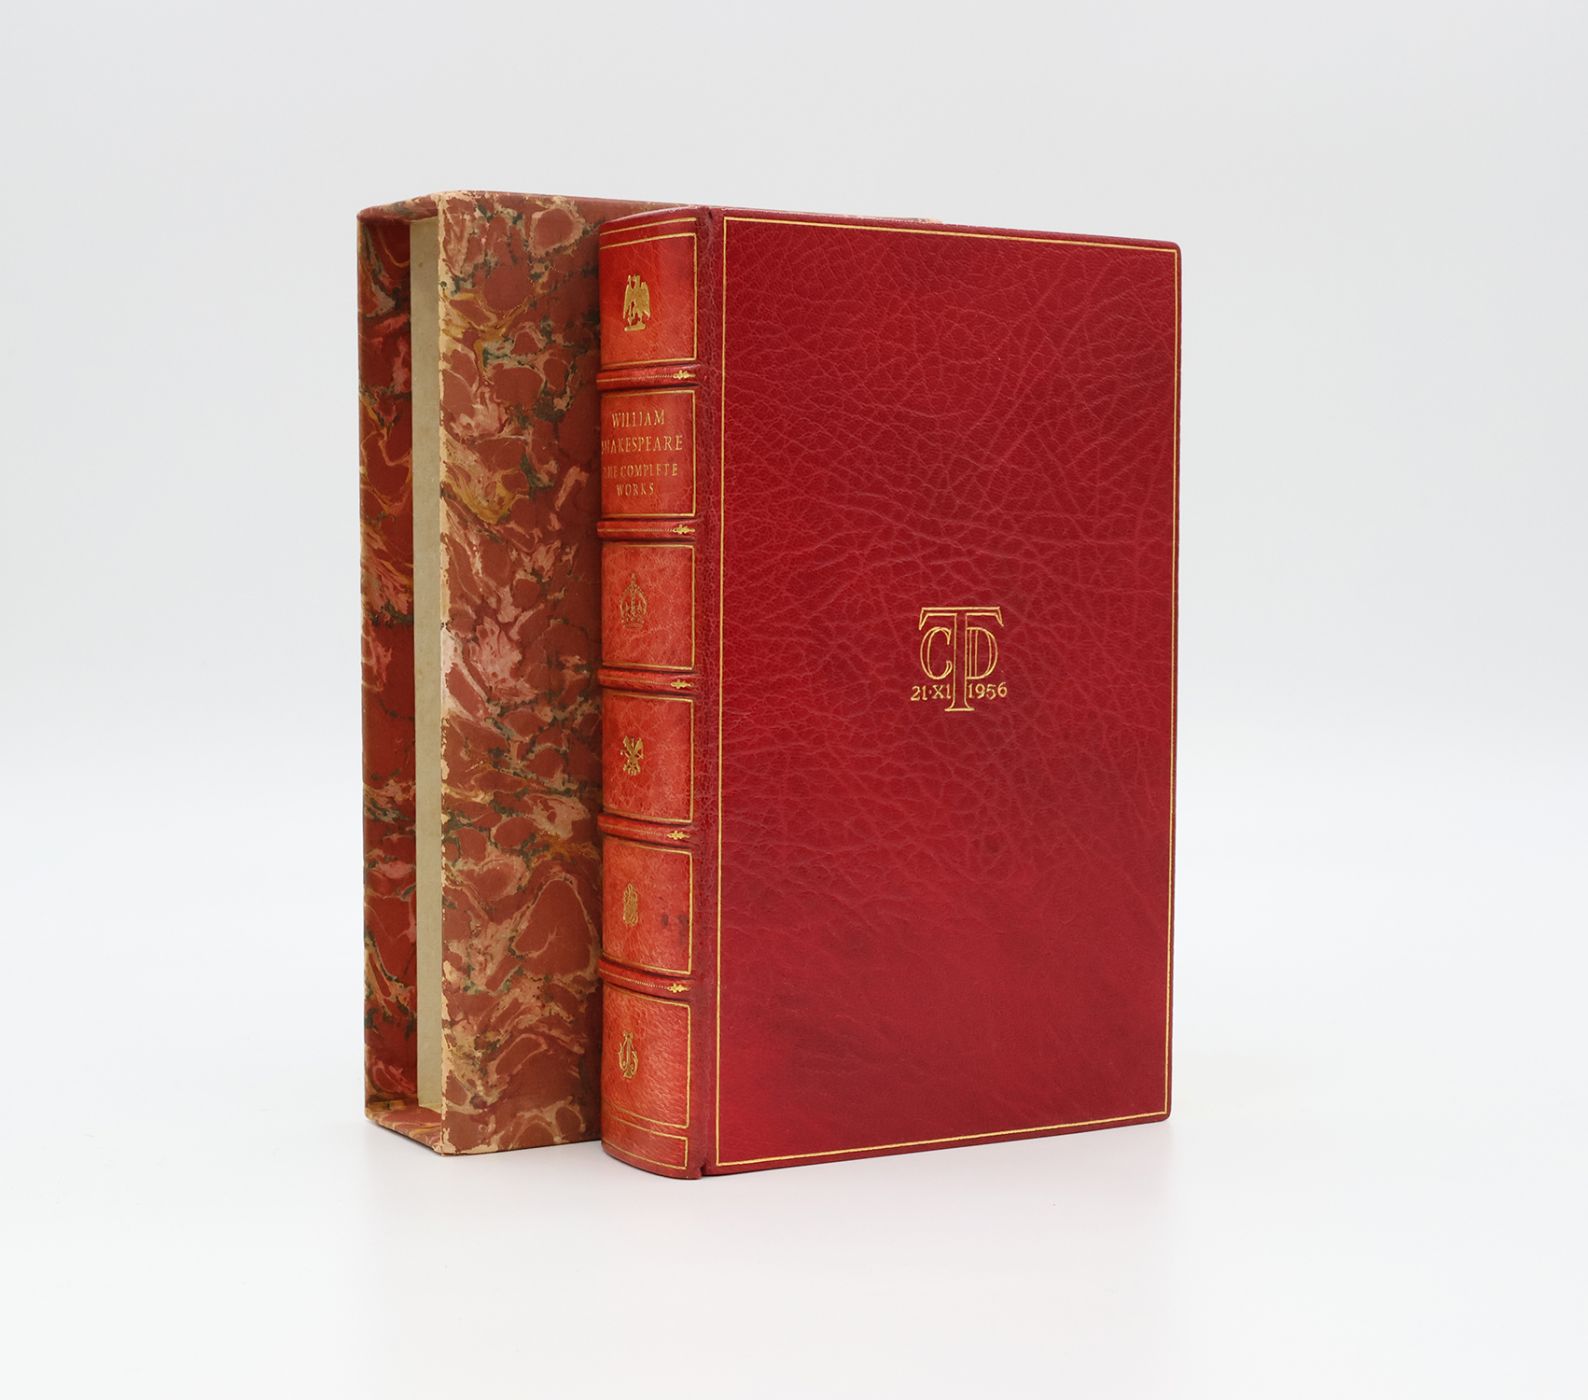 WILLIAM SHAKESPEARE: THE COMPLETE WORKS -  image 1